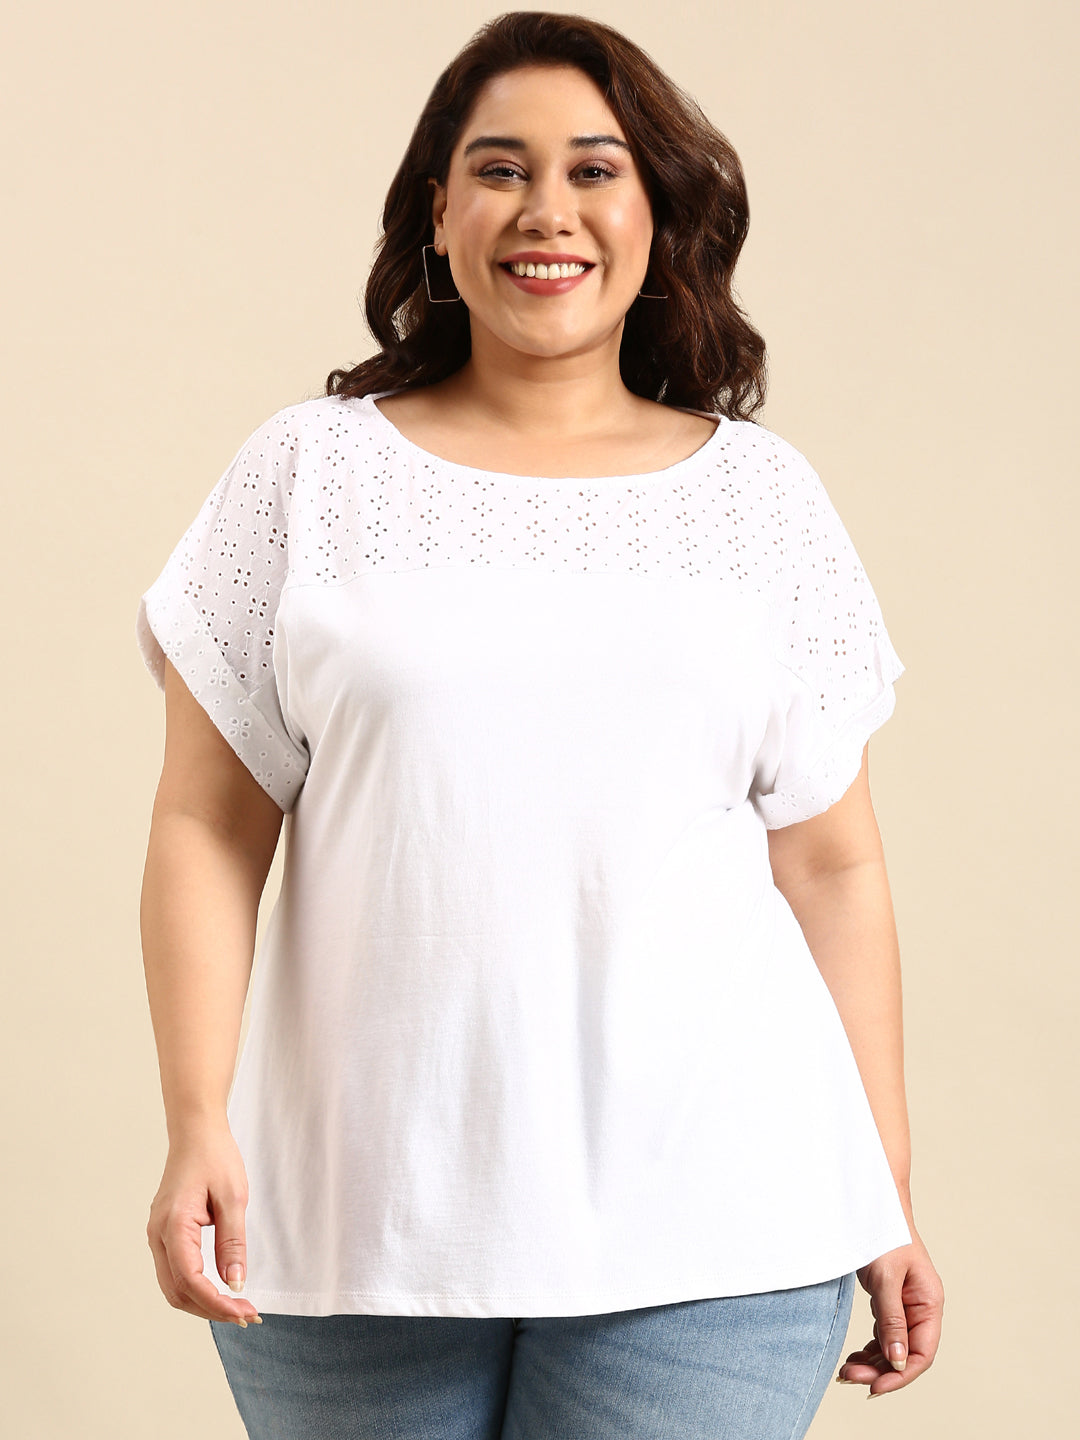 WHITE COLOR BLOCK TOP WITH SHIFLY